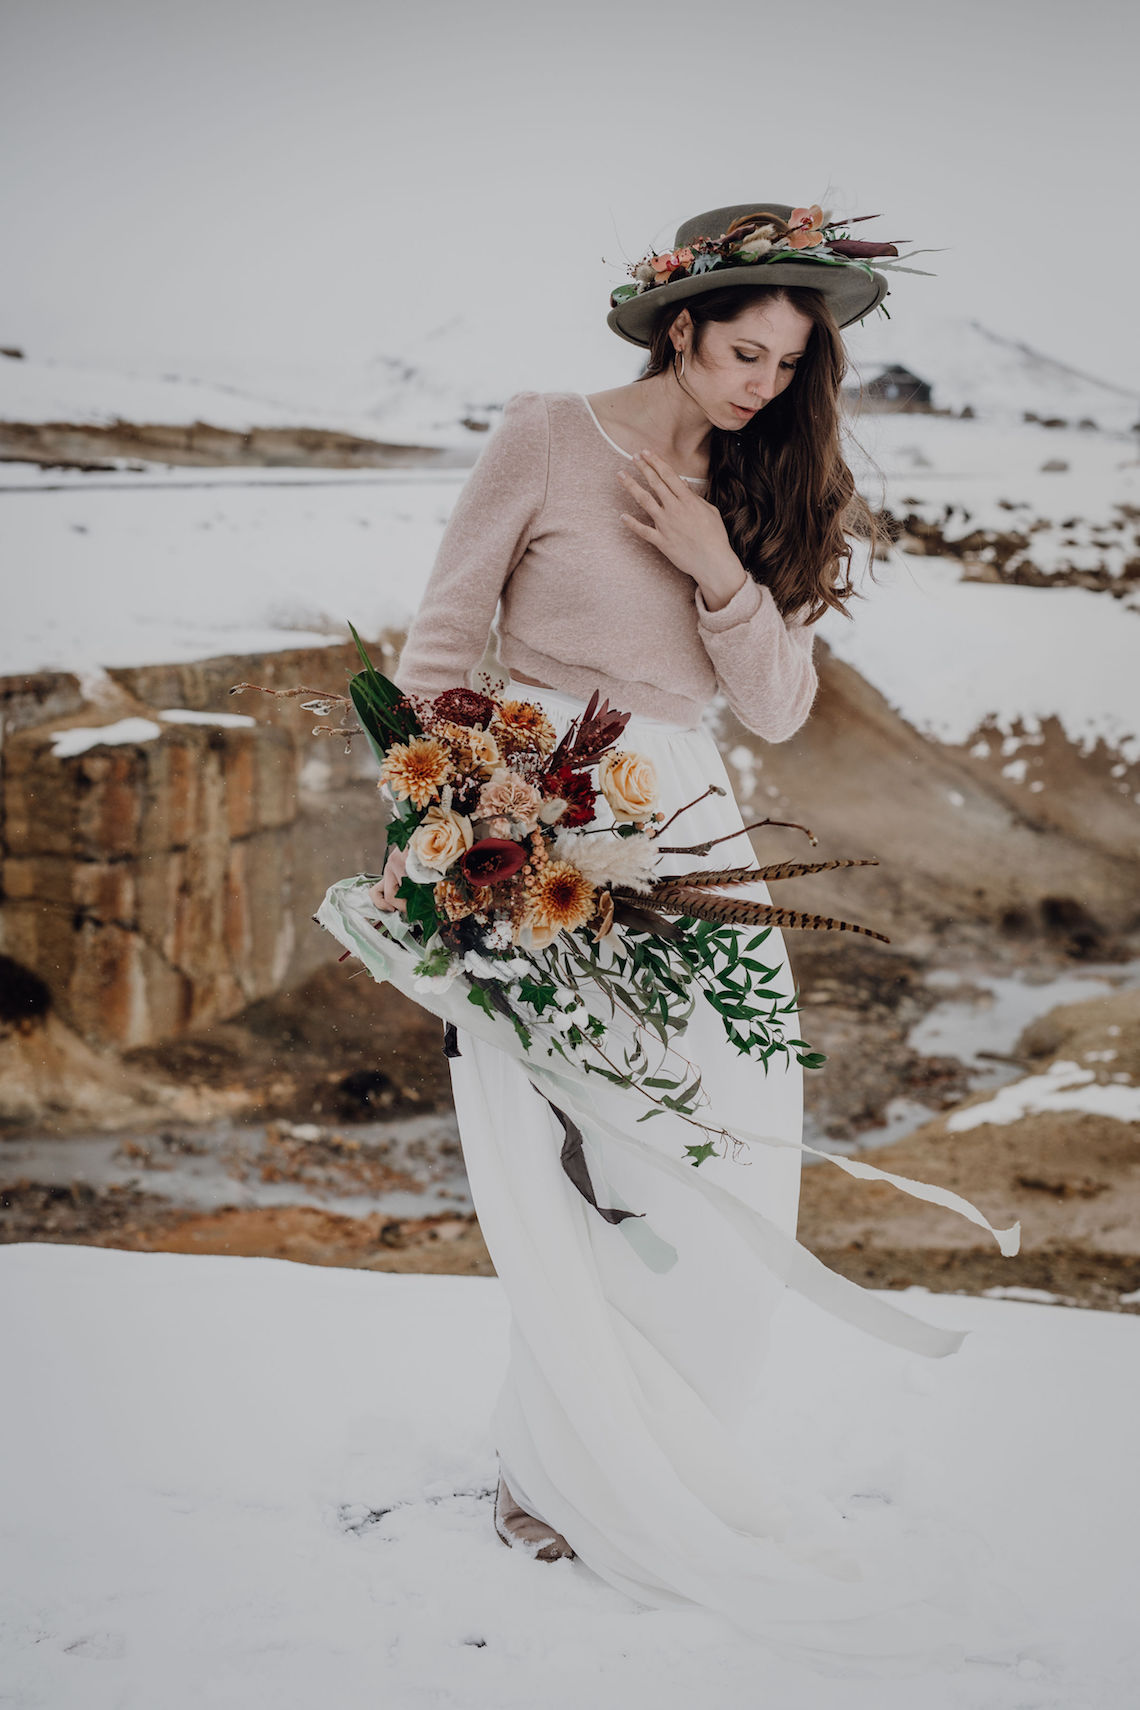 Wild Winter Wedding Inspiration from Iceland – Snowy Scenery and a Bridal Sweater – Melanie Munoz Photography 26